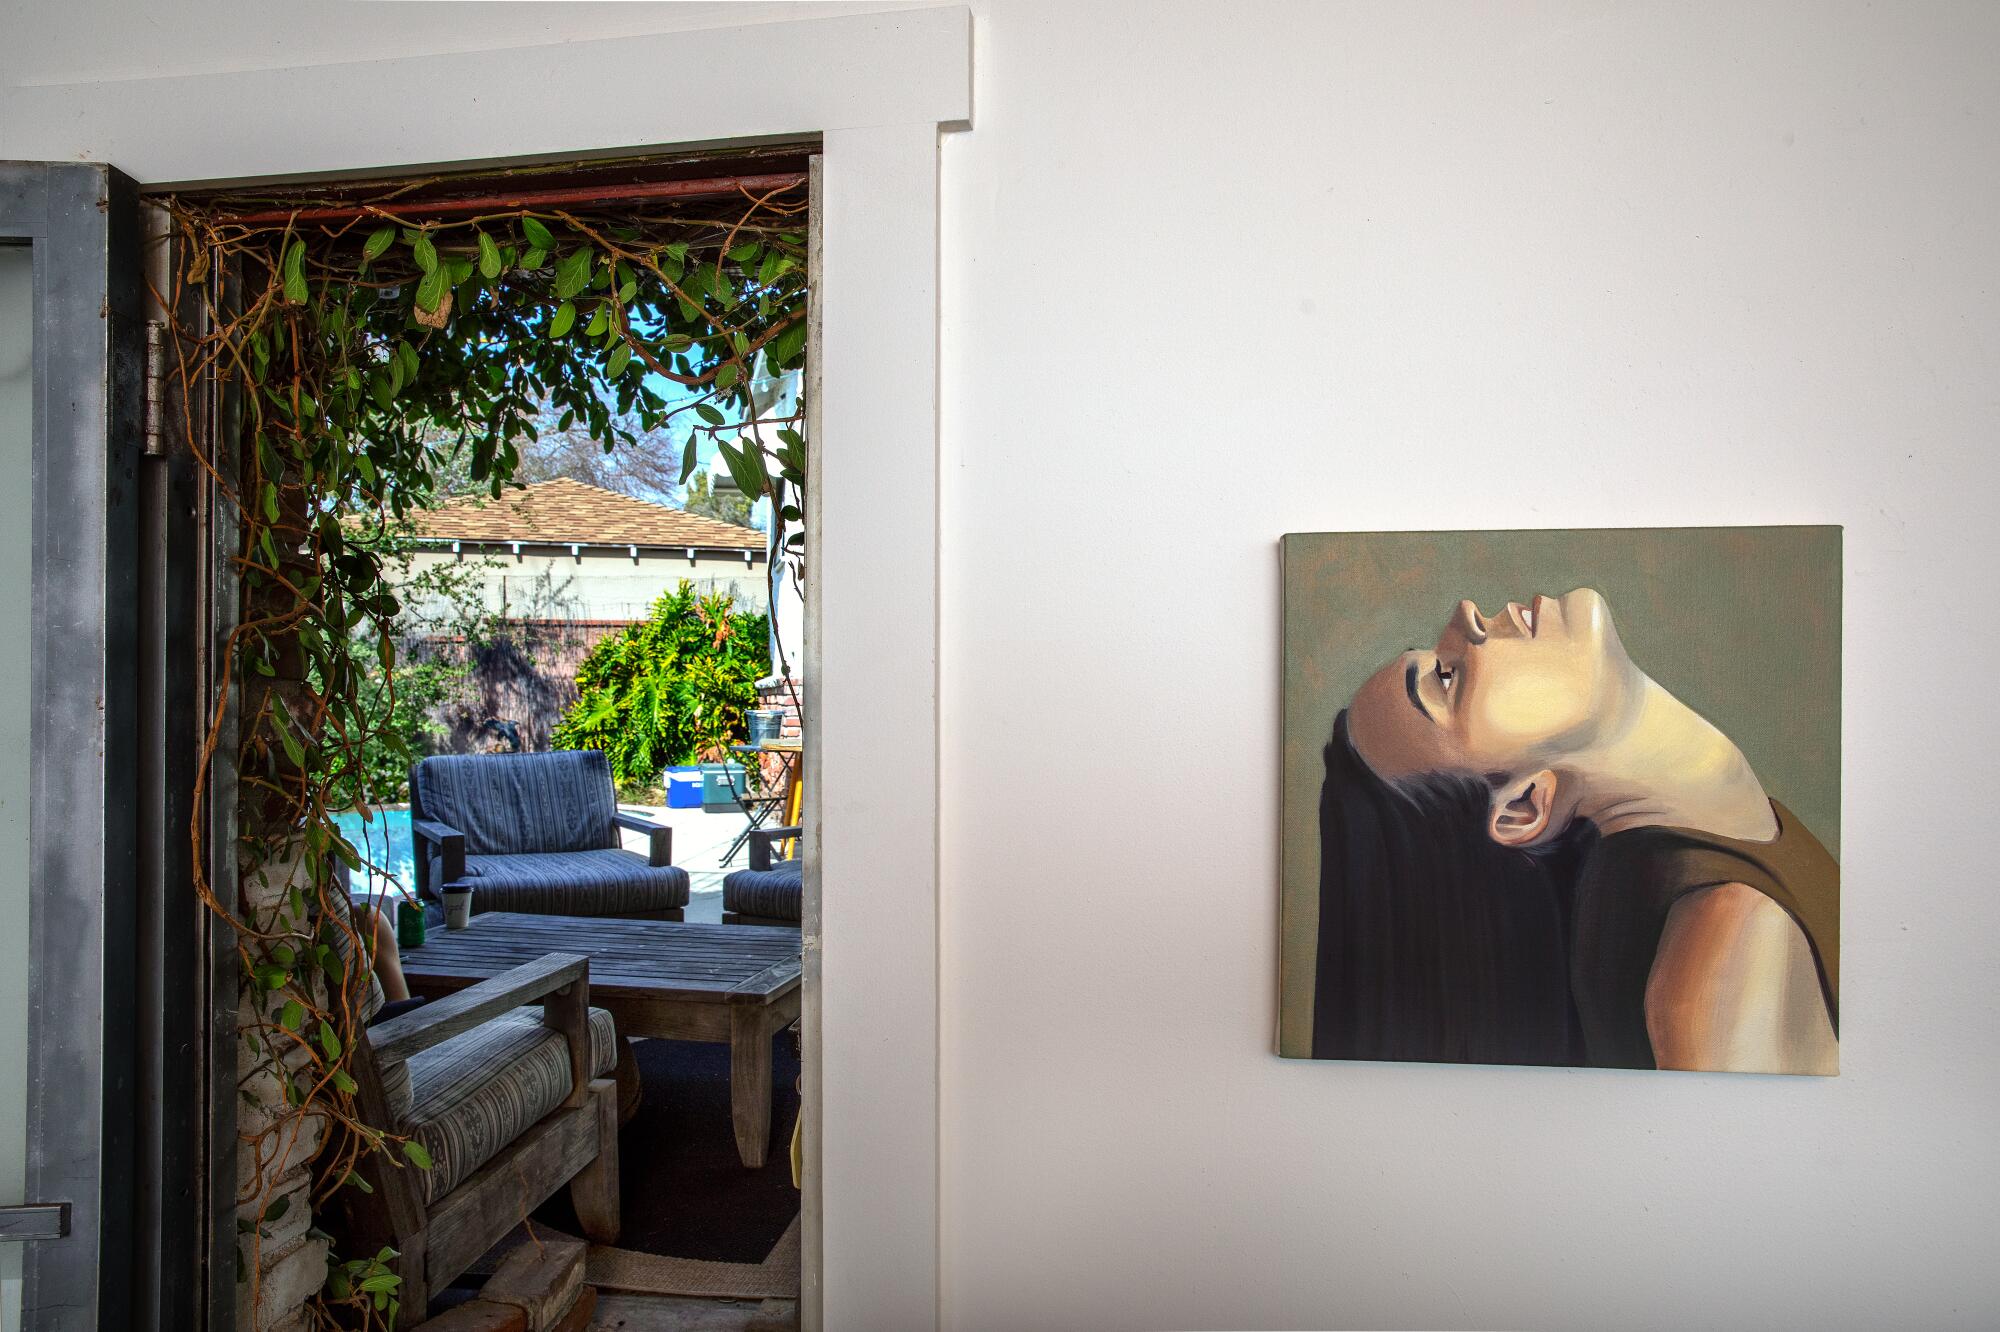 An oil painting of a woman hangs on a wall next to an open door that leads to a backyard with pool